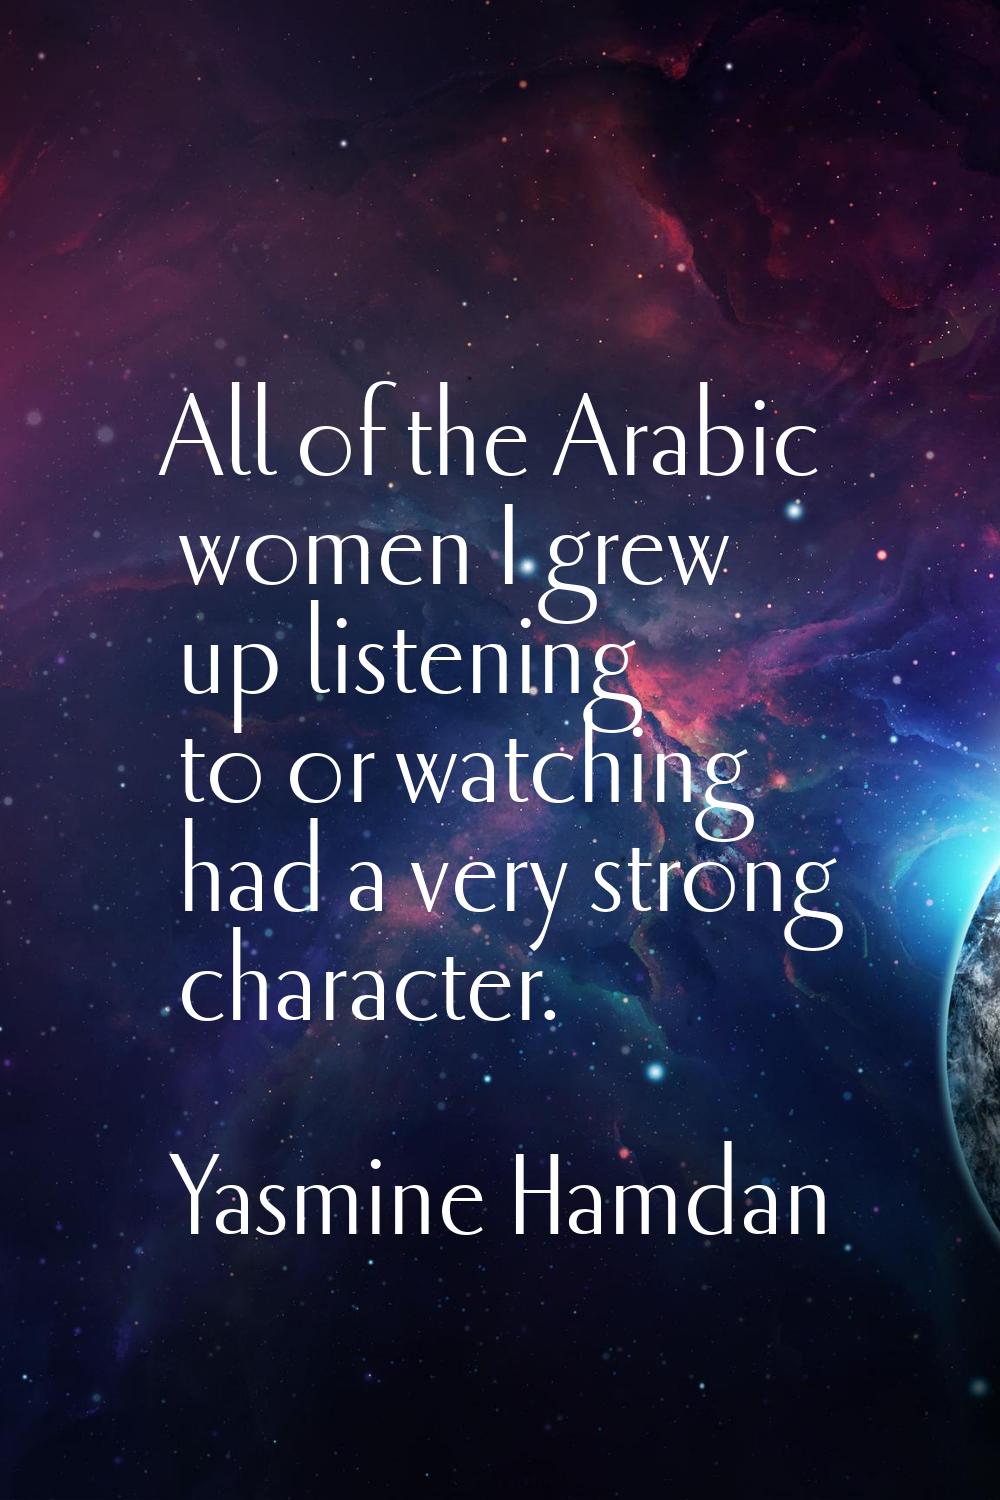 All of the Arabic women I grew up listening to or watching had a very strong character.